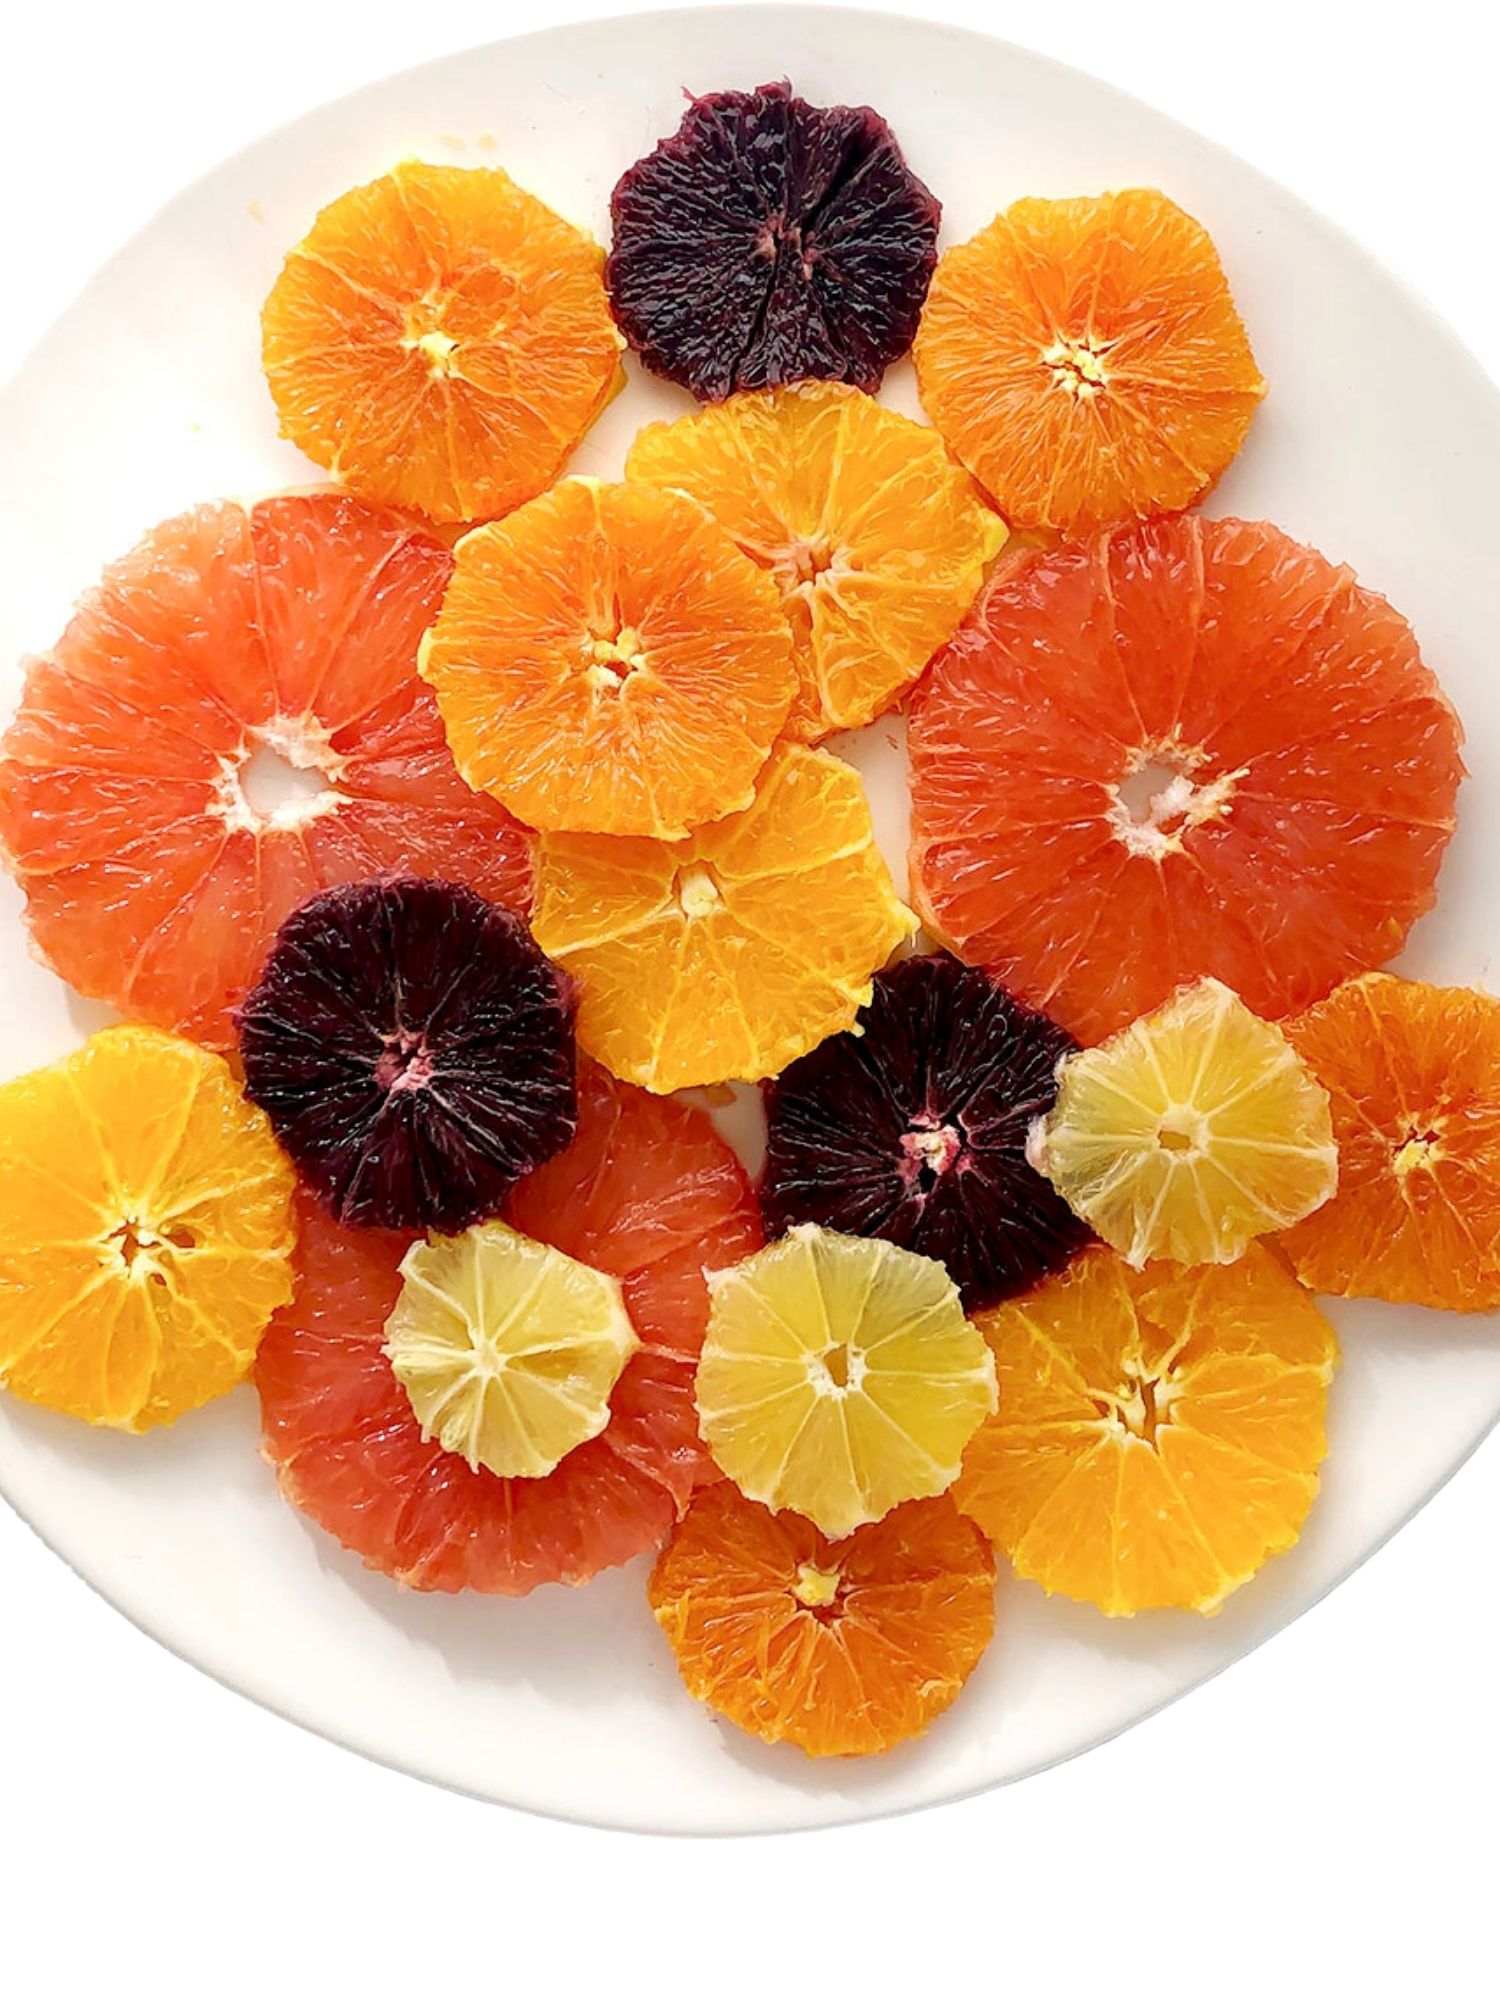 Top down shot of white plate with slices of pink grapefruit, navel oranges, tangelos, blood oranges, and lemon. This is one of the steps in making Simple Citrus Salad.